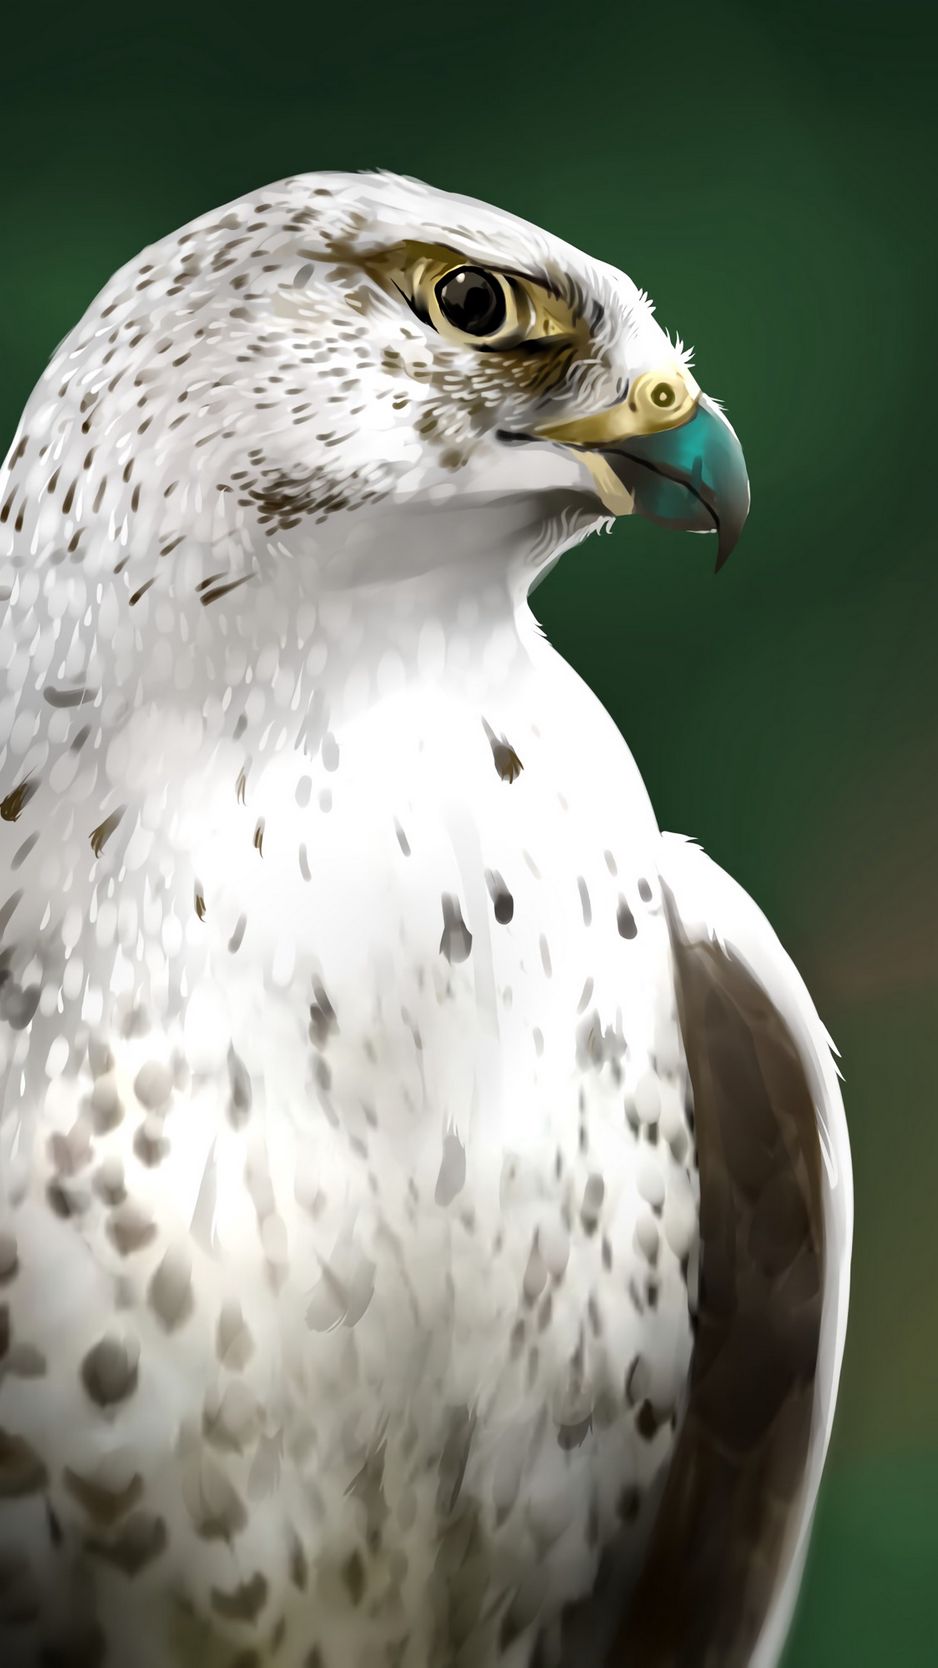 Download Wallpaper 938x1668 Falcon Bird Glance Art Iphone 8 7 6s 6 For Parallax Hd Background